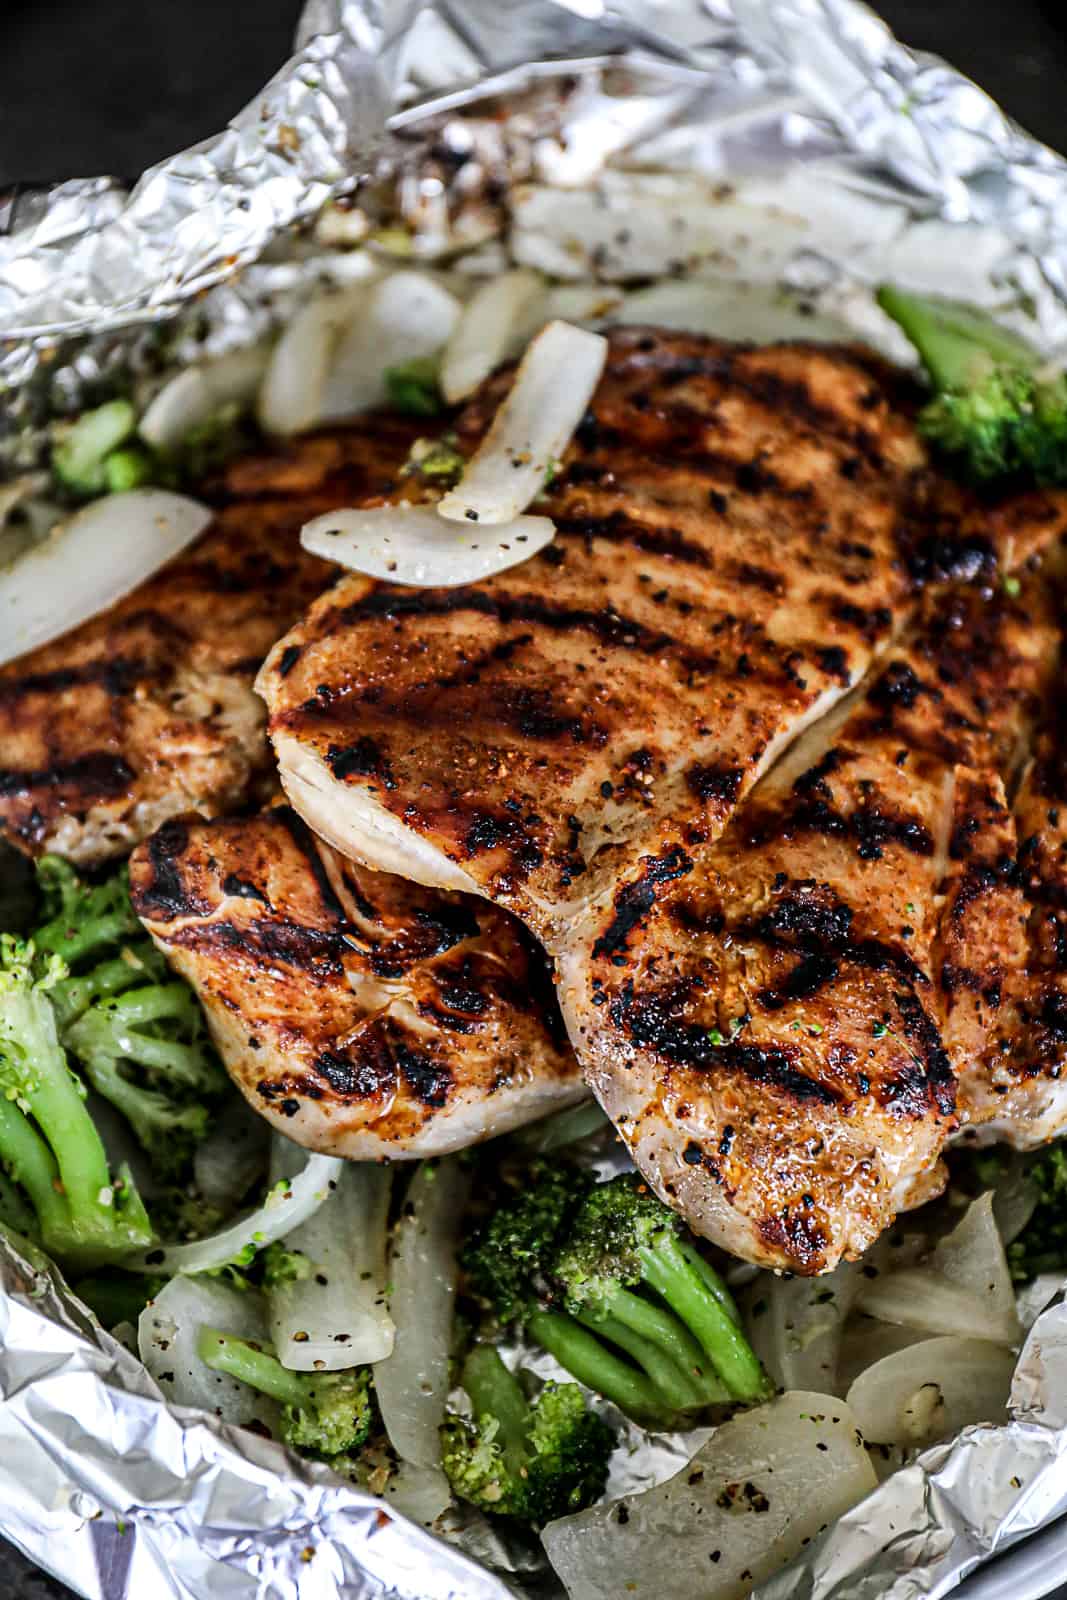 Grilled Side Dish Broccoli Vegetables with Chicken Breast